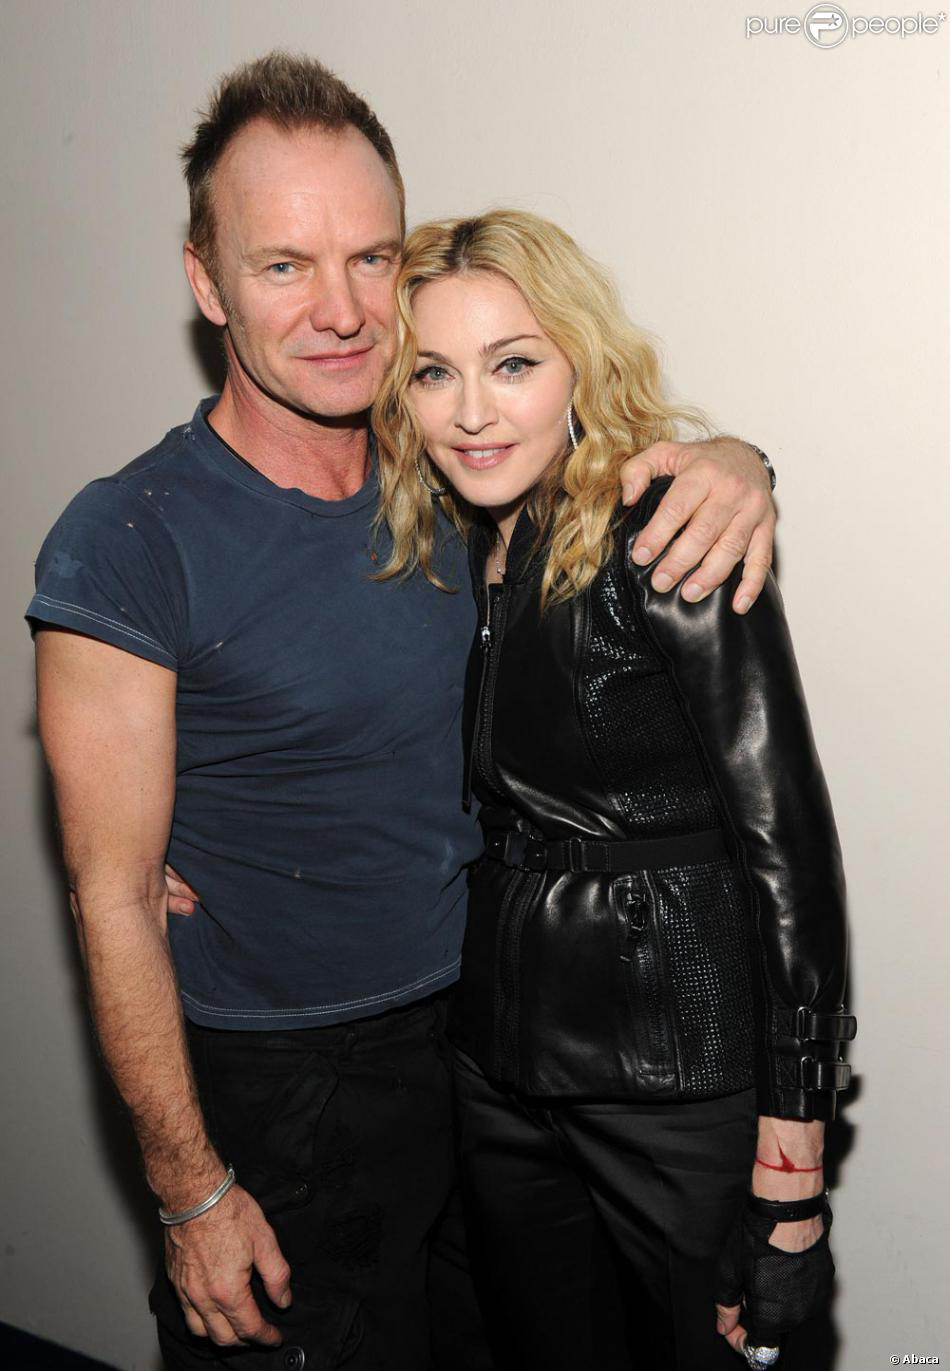 Madonna and Sting at the 2010 Hope For Haiti benefit concert